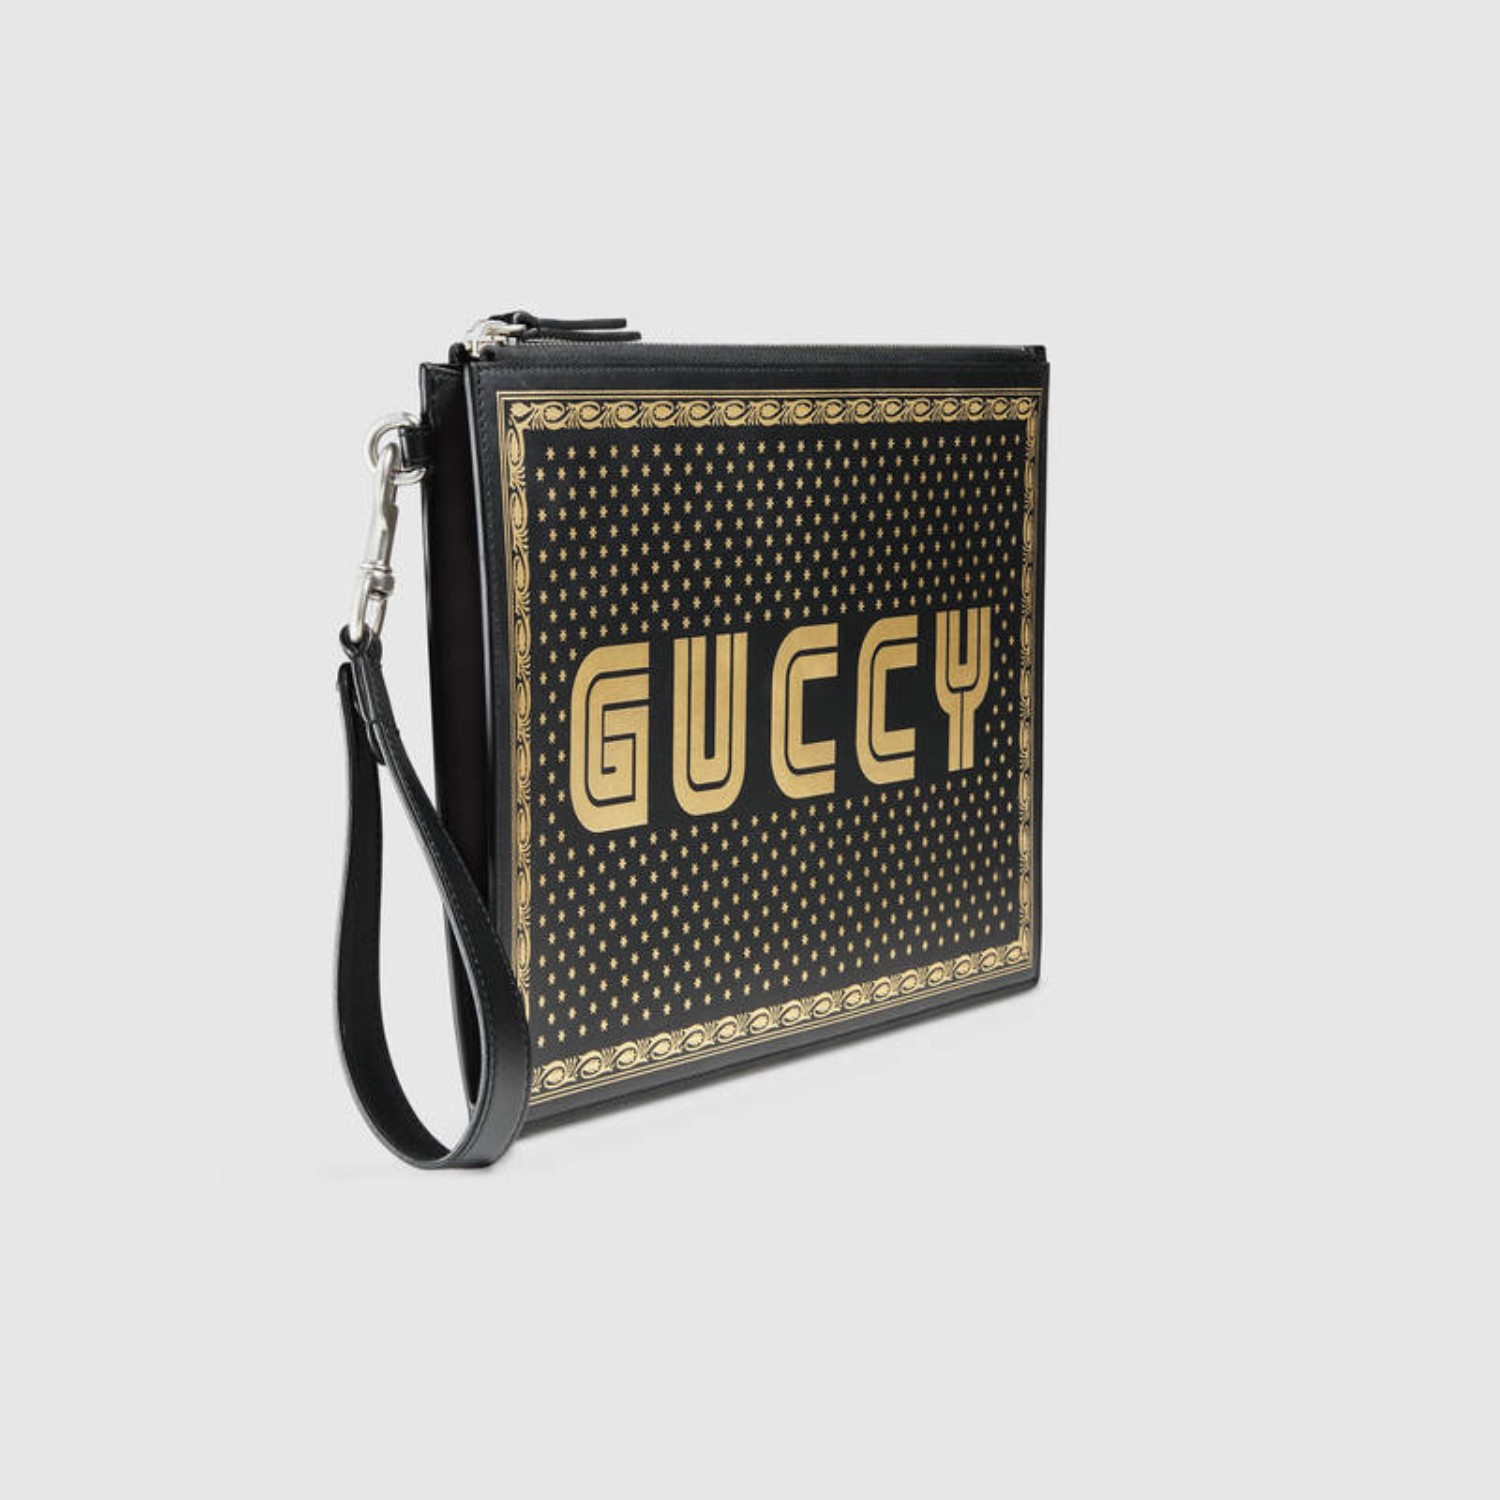 Gucci Stays Playful With With Guccy SEGA Collection